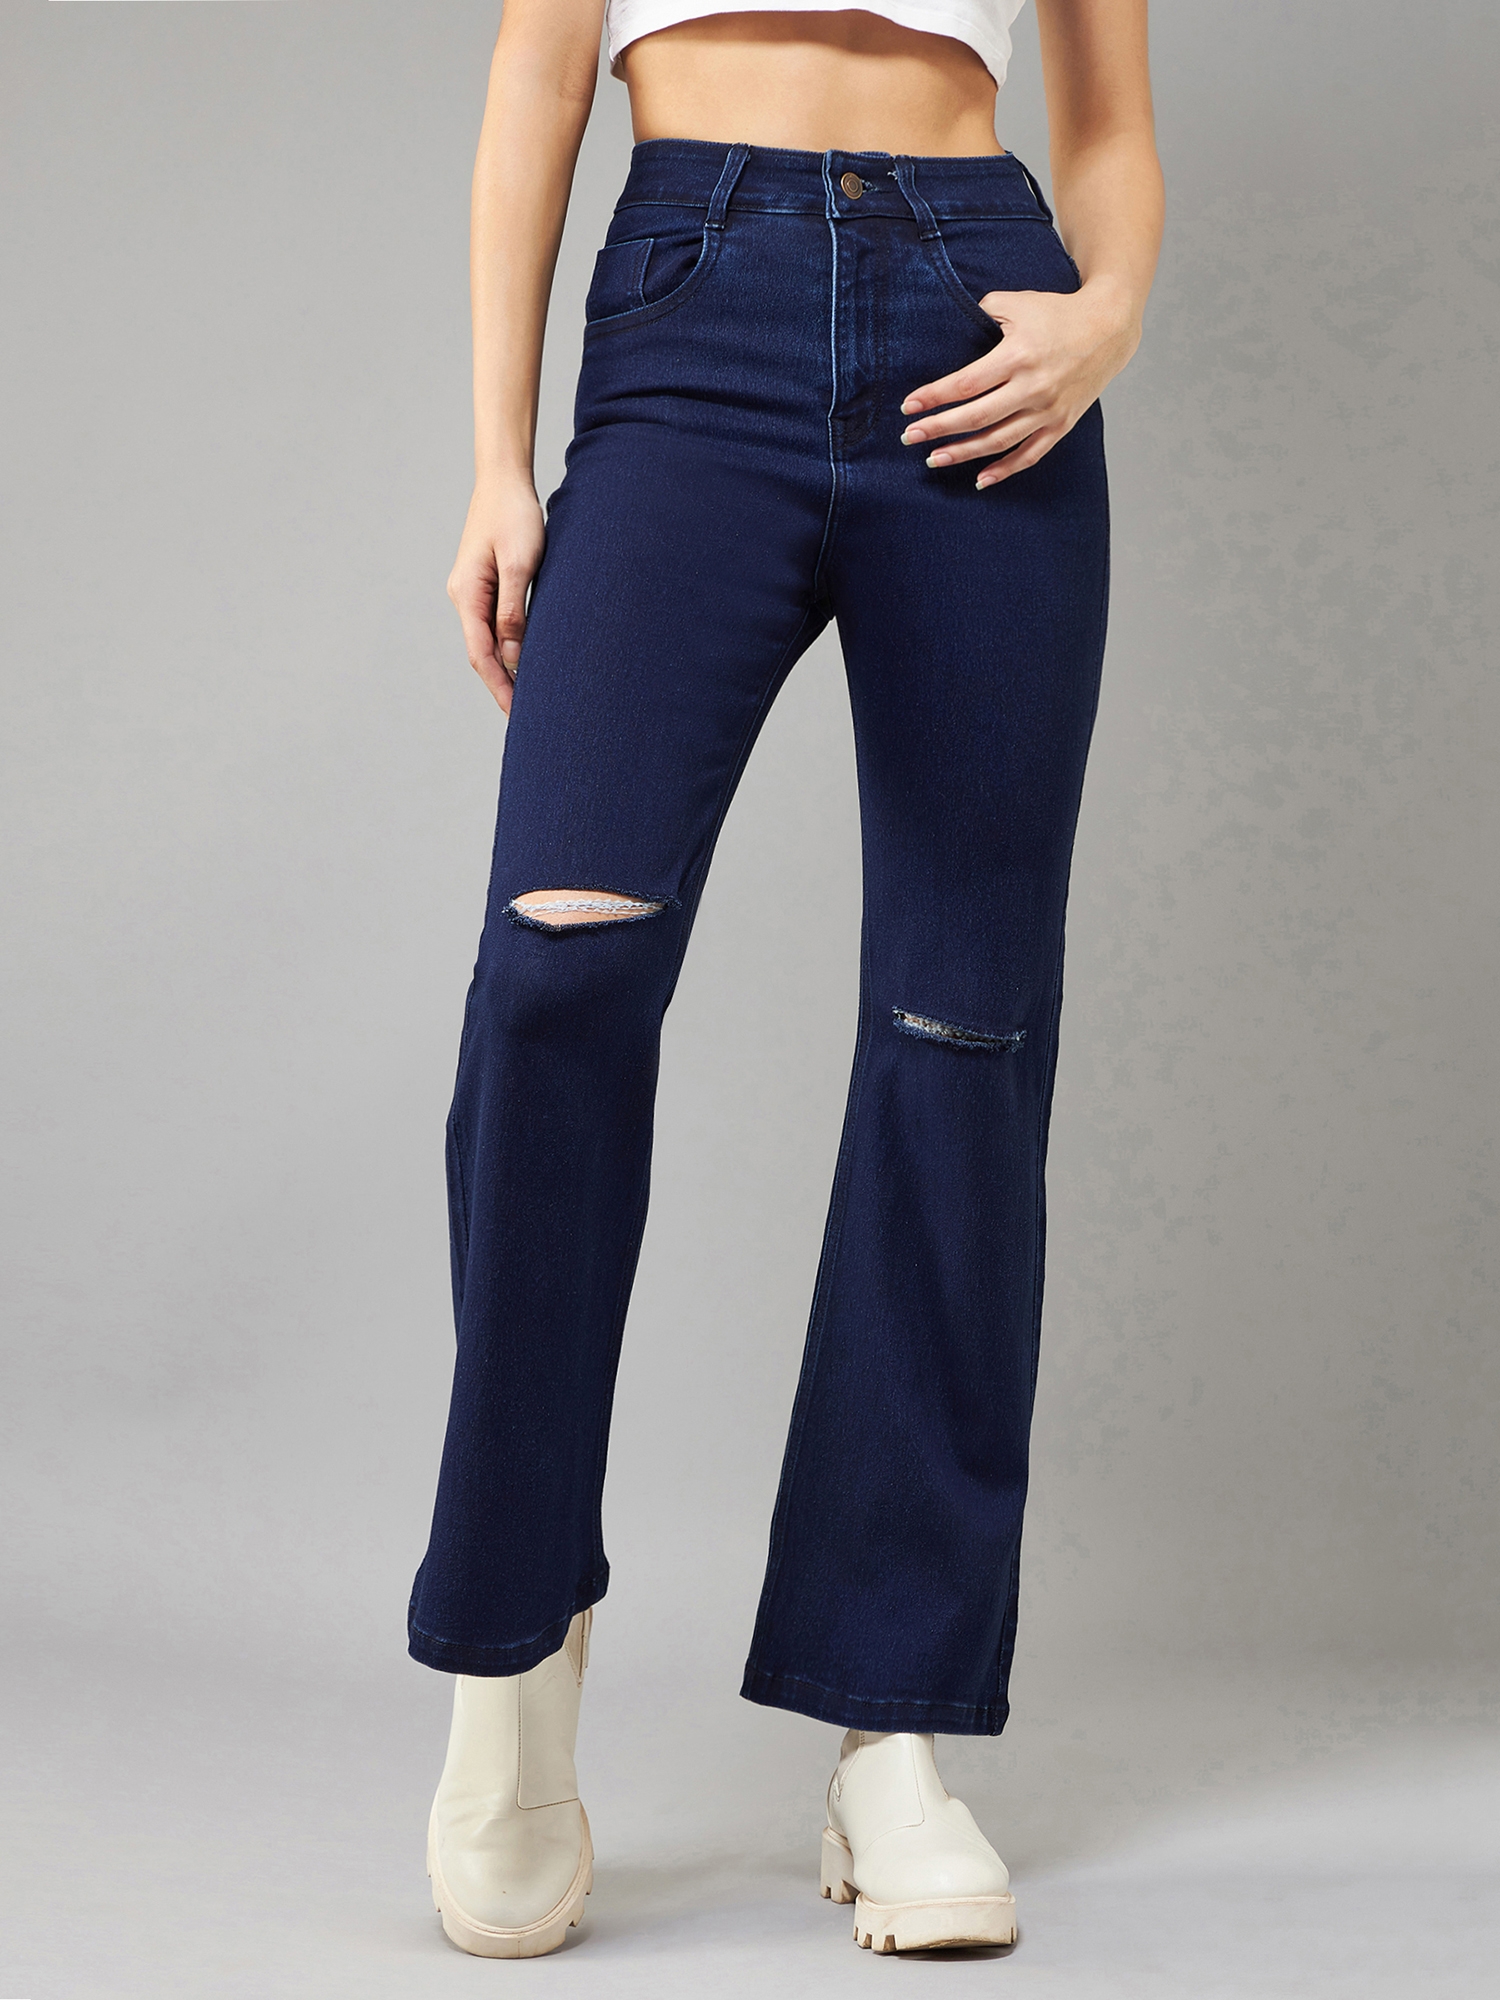 Bell Bottom Jeans for Women Ripped High Waisted Classic Flared Pants | eBay